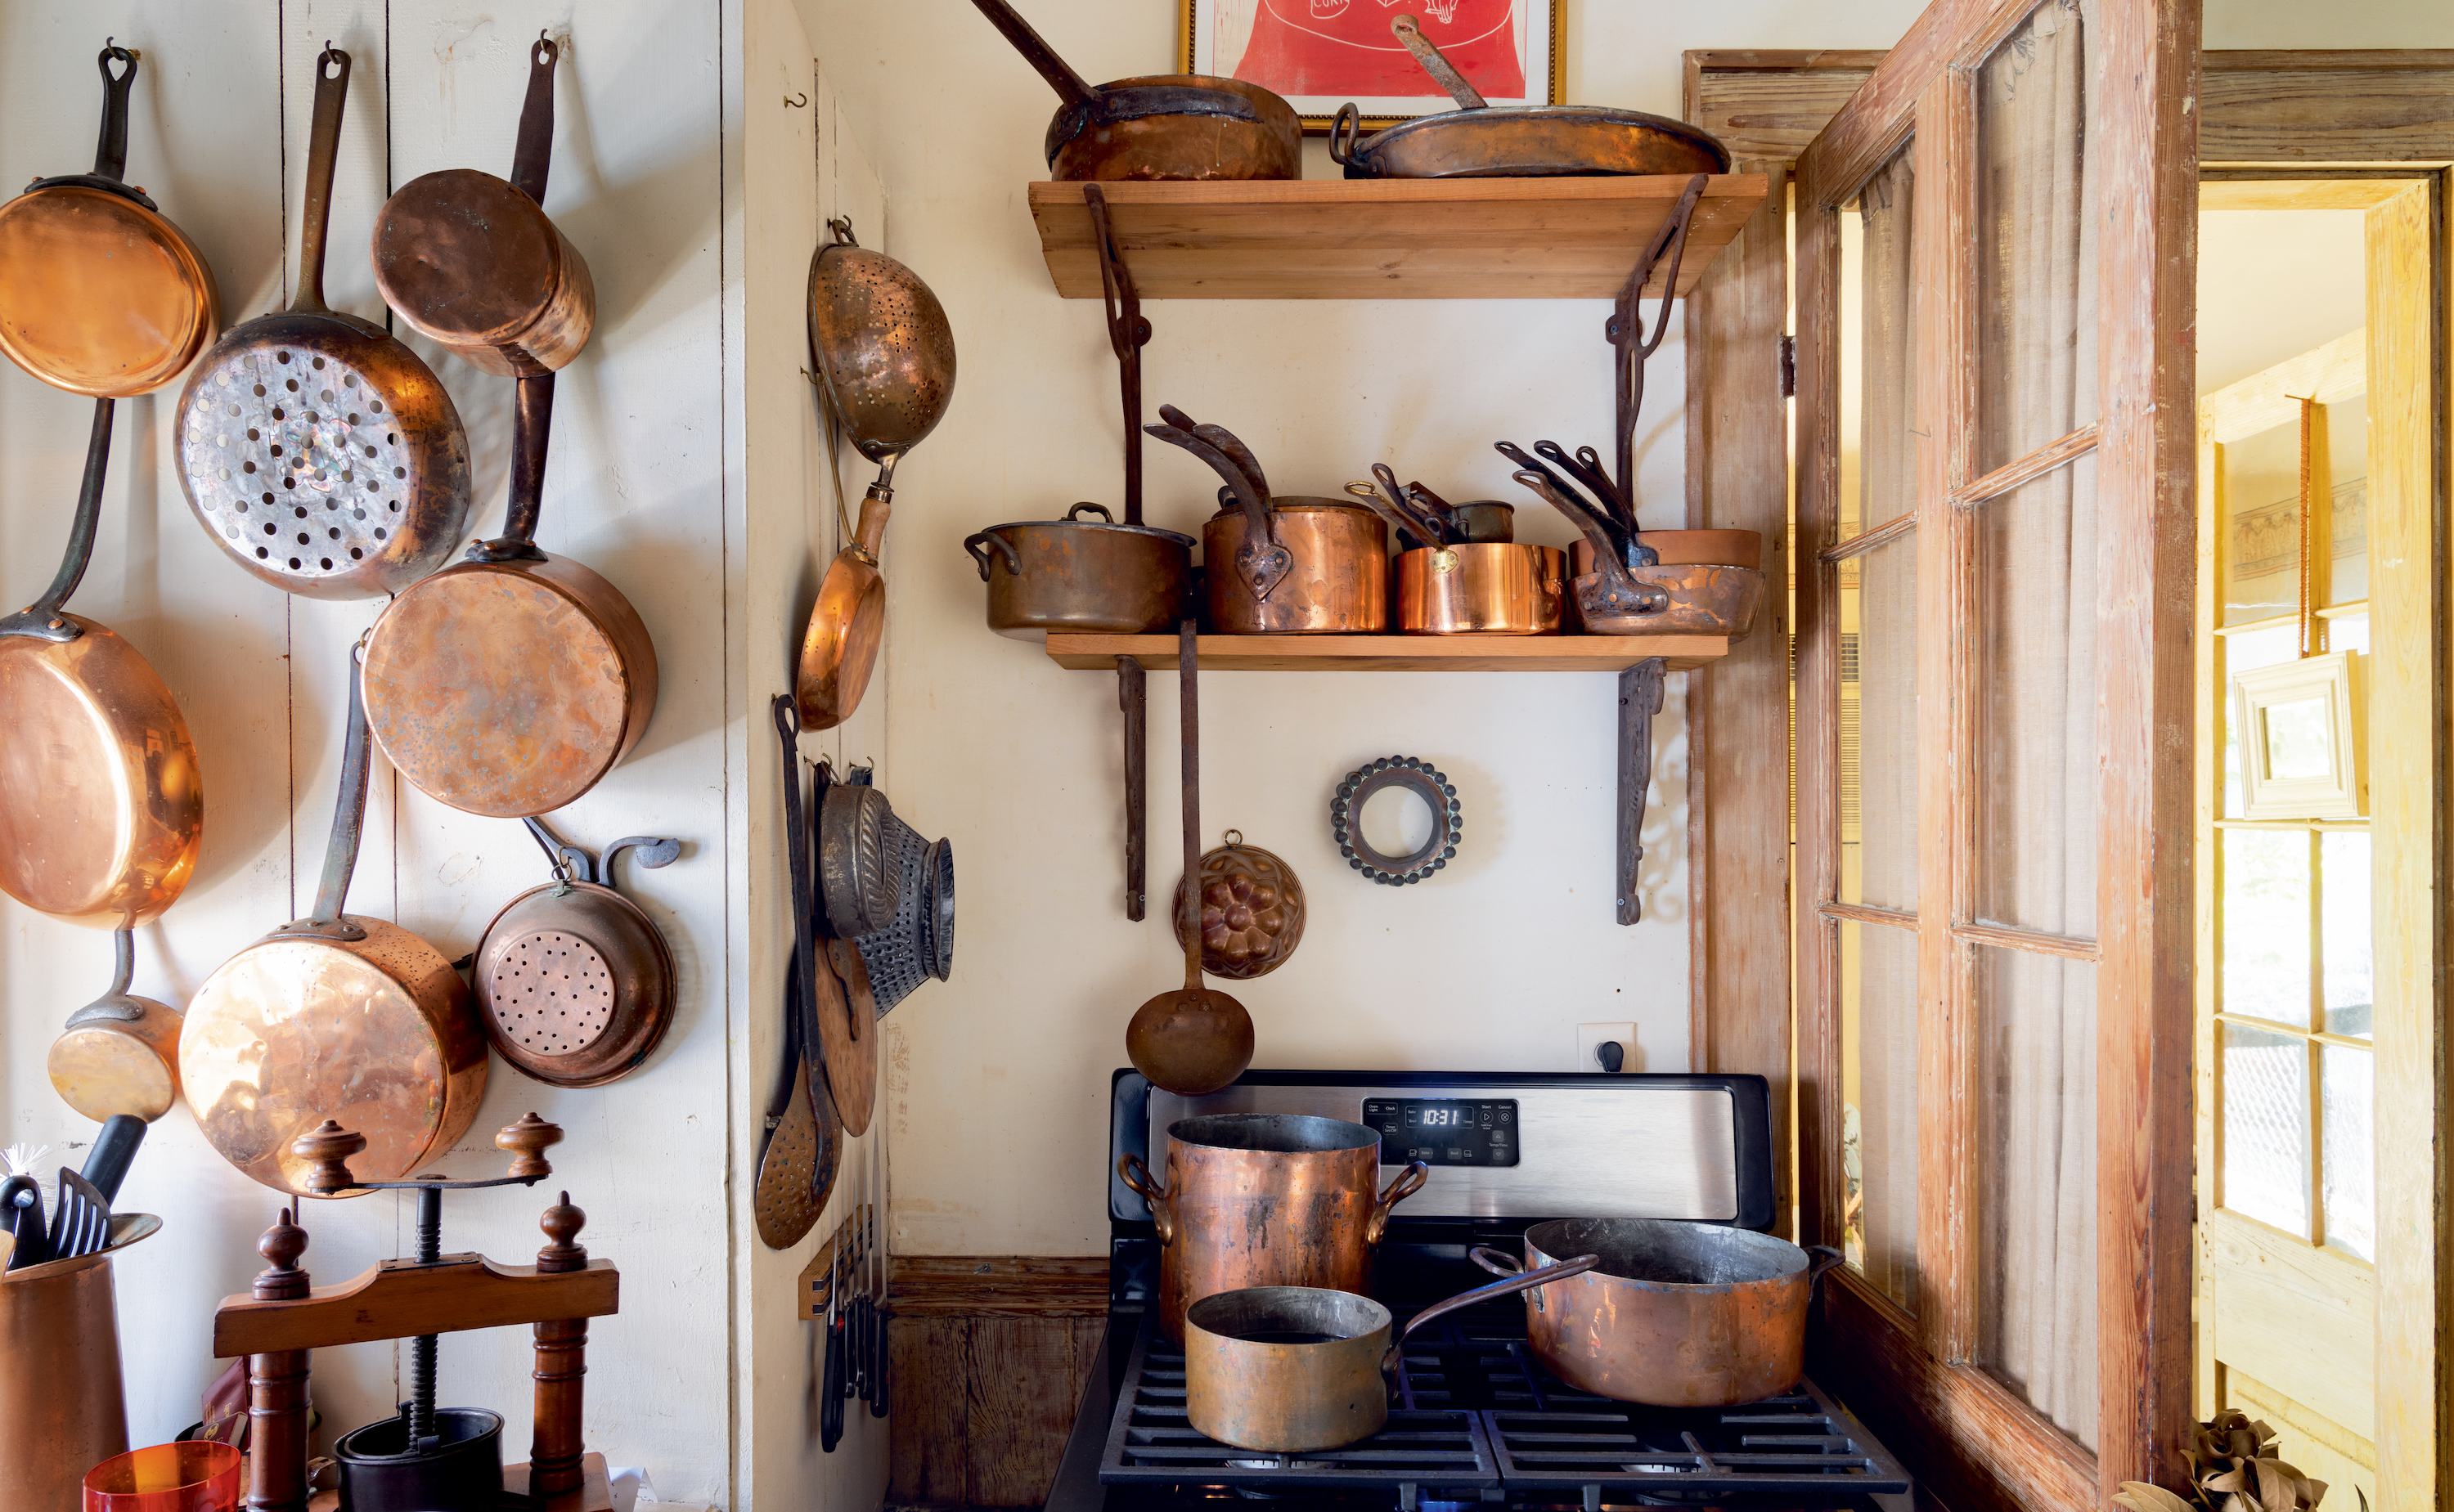 A kitchen with copper pots on the walls and on a stove. On the right, a wood door is open